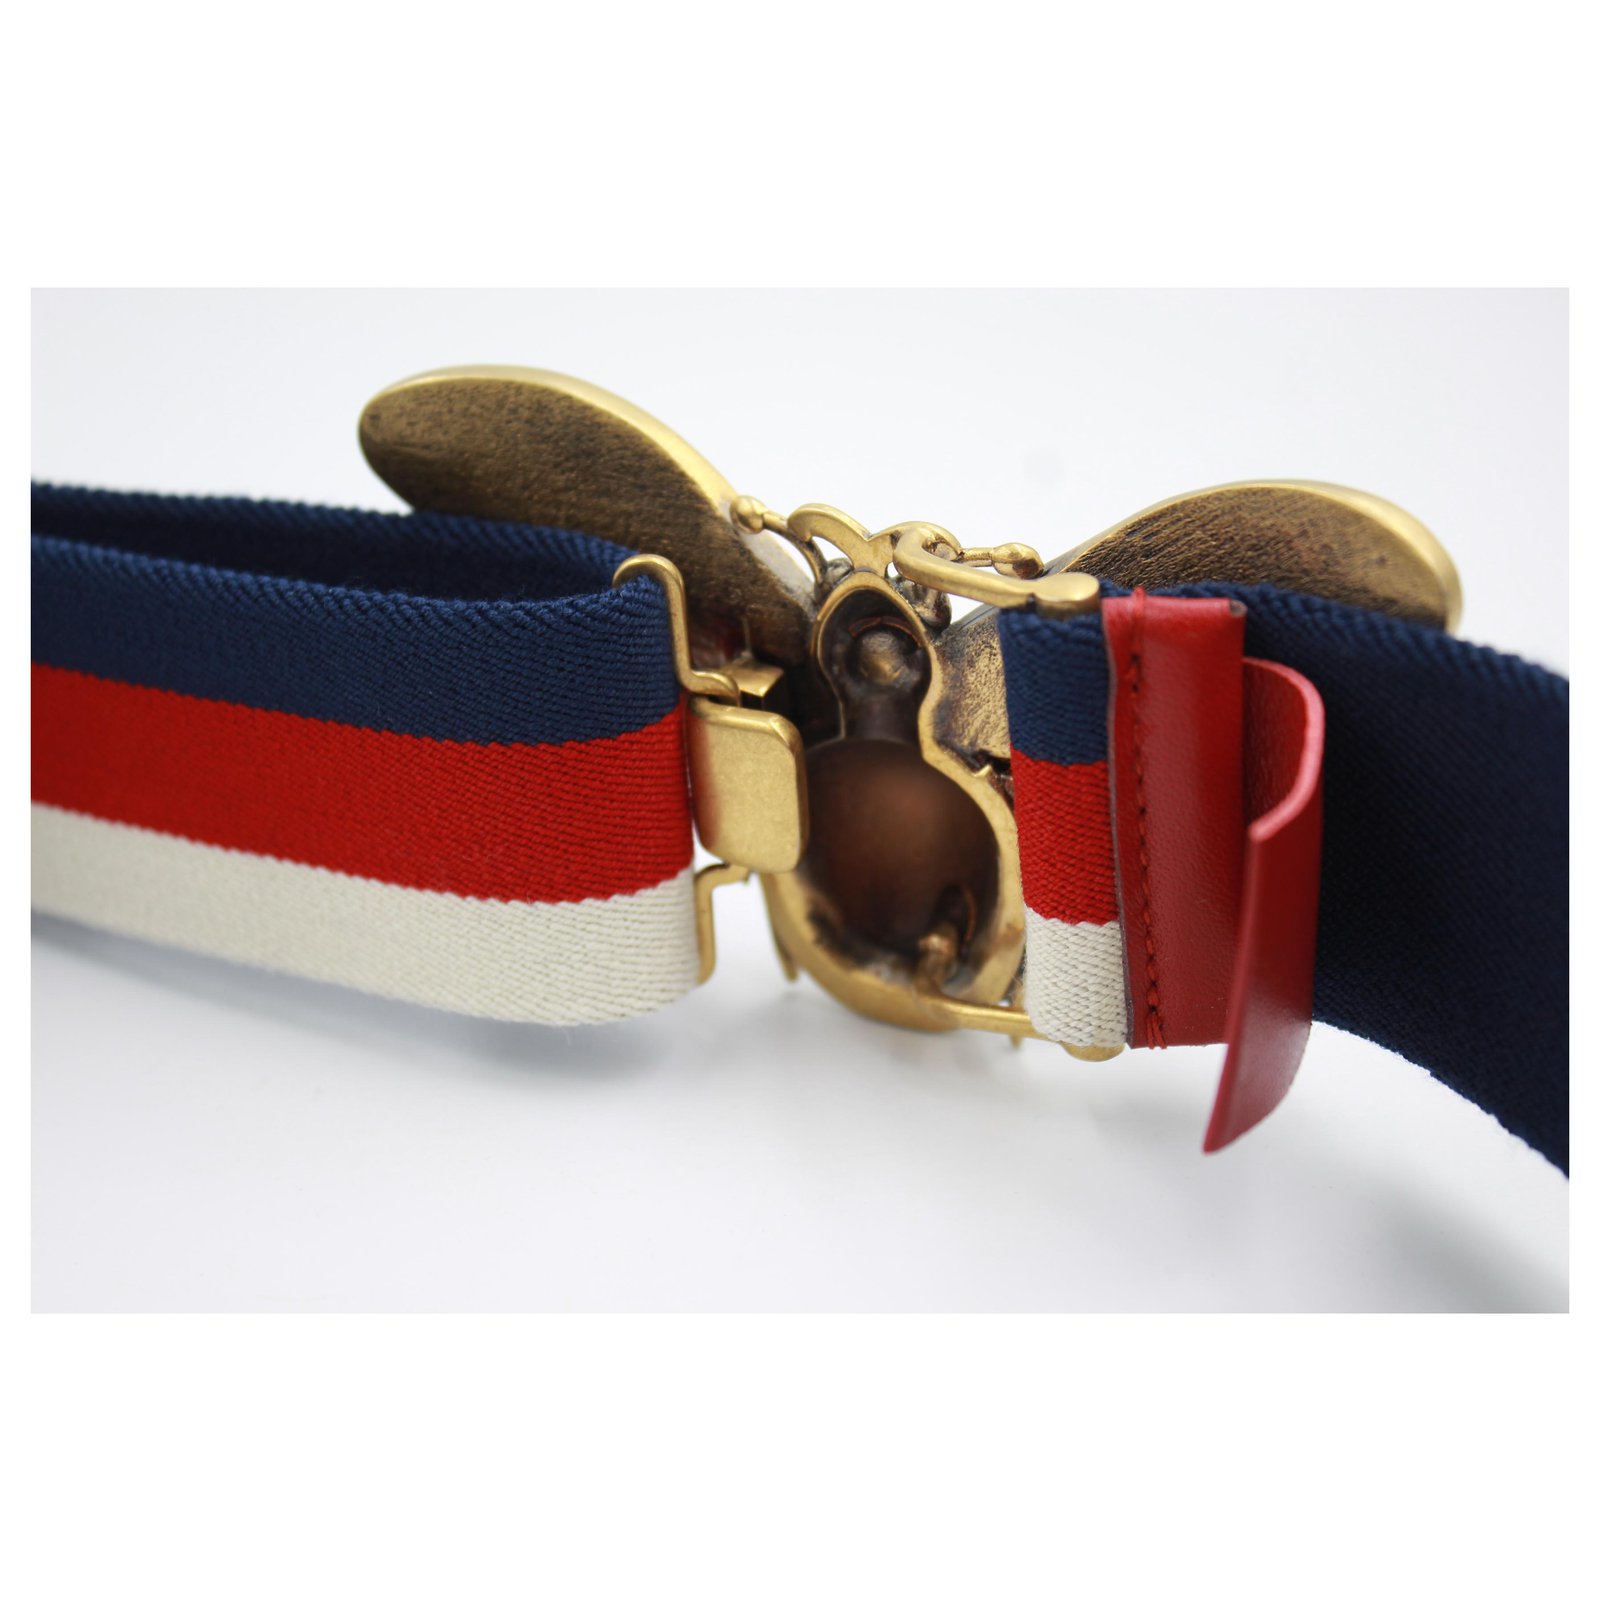 gucci belt with colored stones